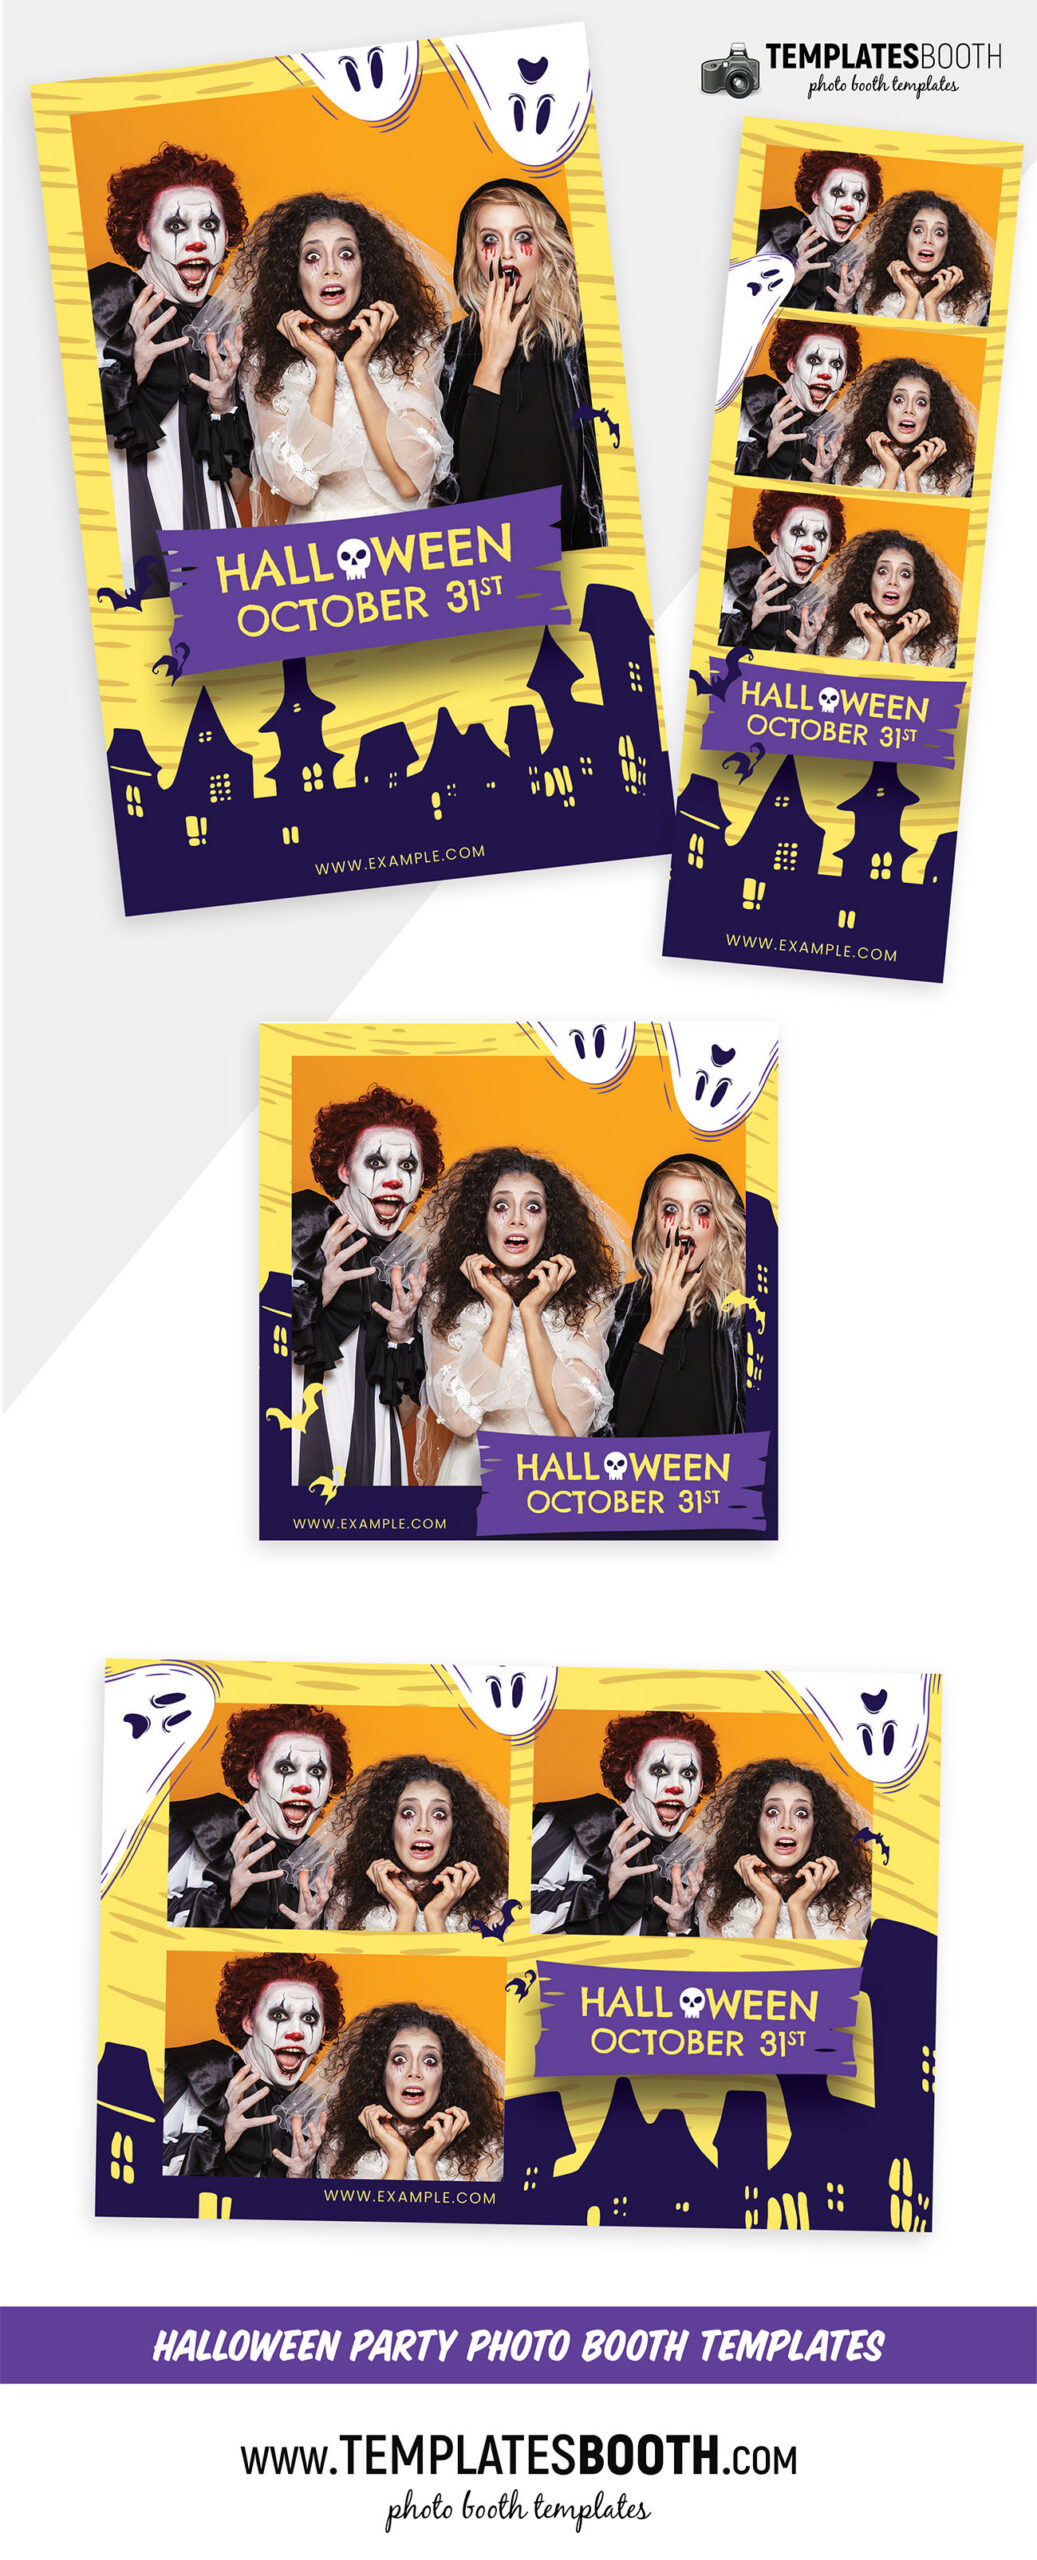 Halloween Photo Booth Template (PSD, PNG & DSLR Booth)